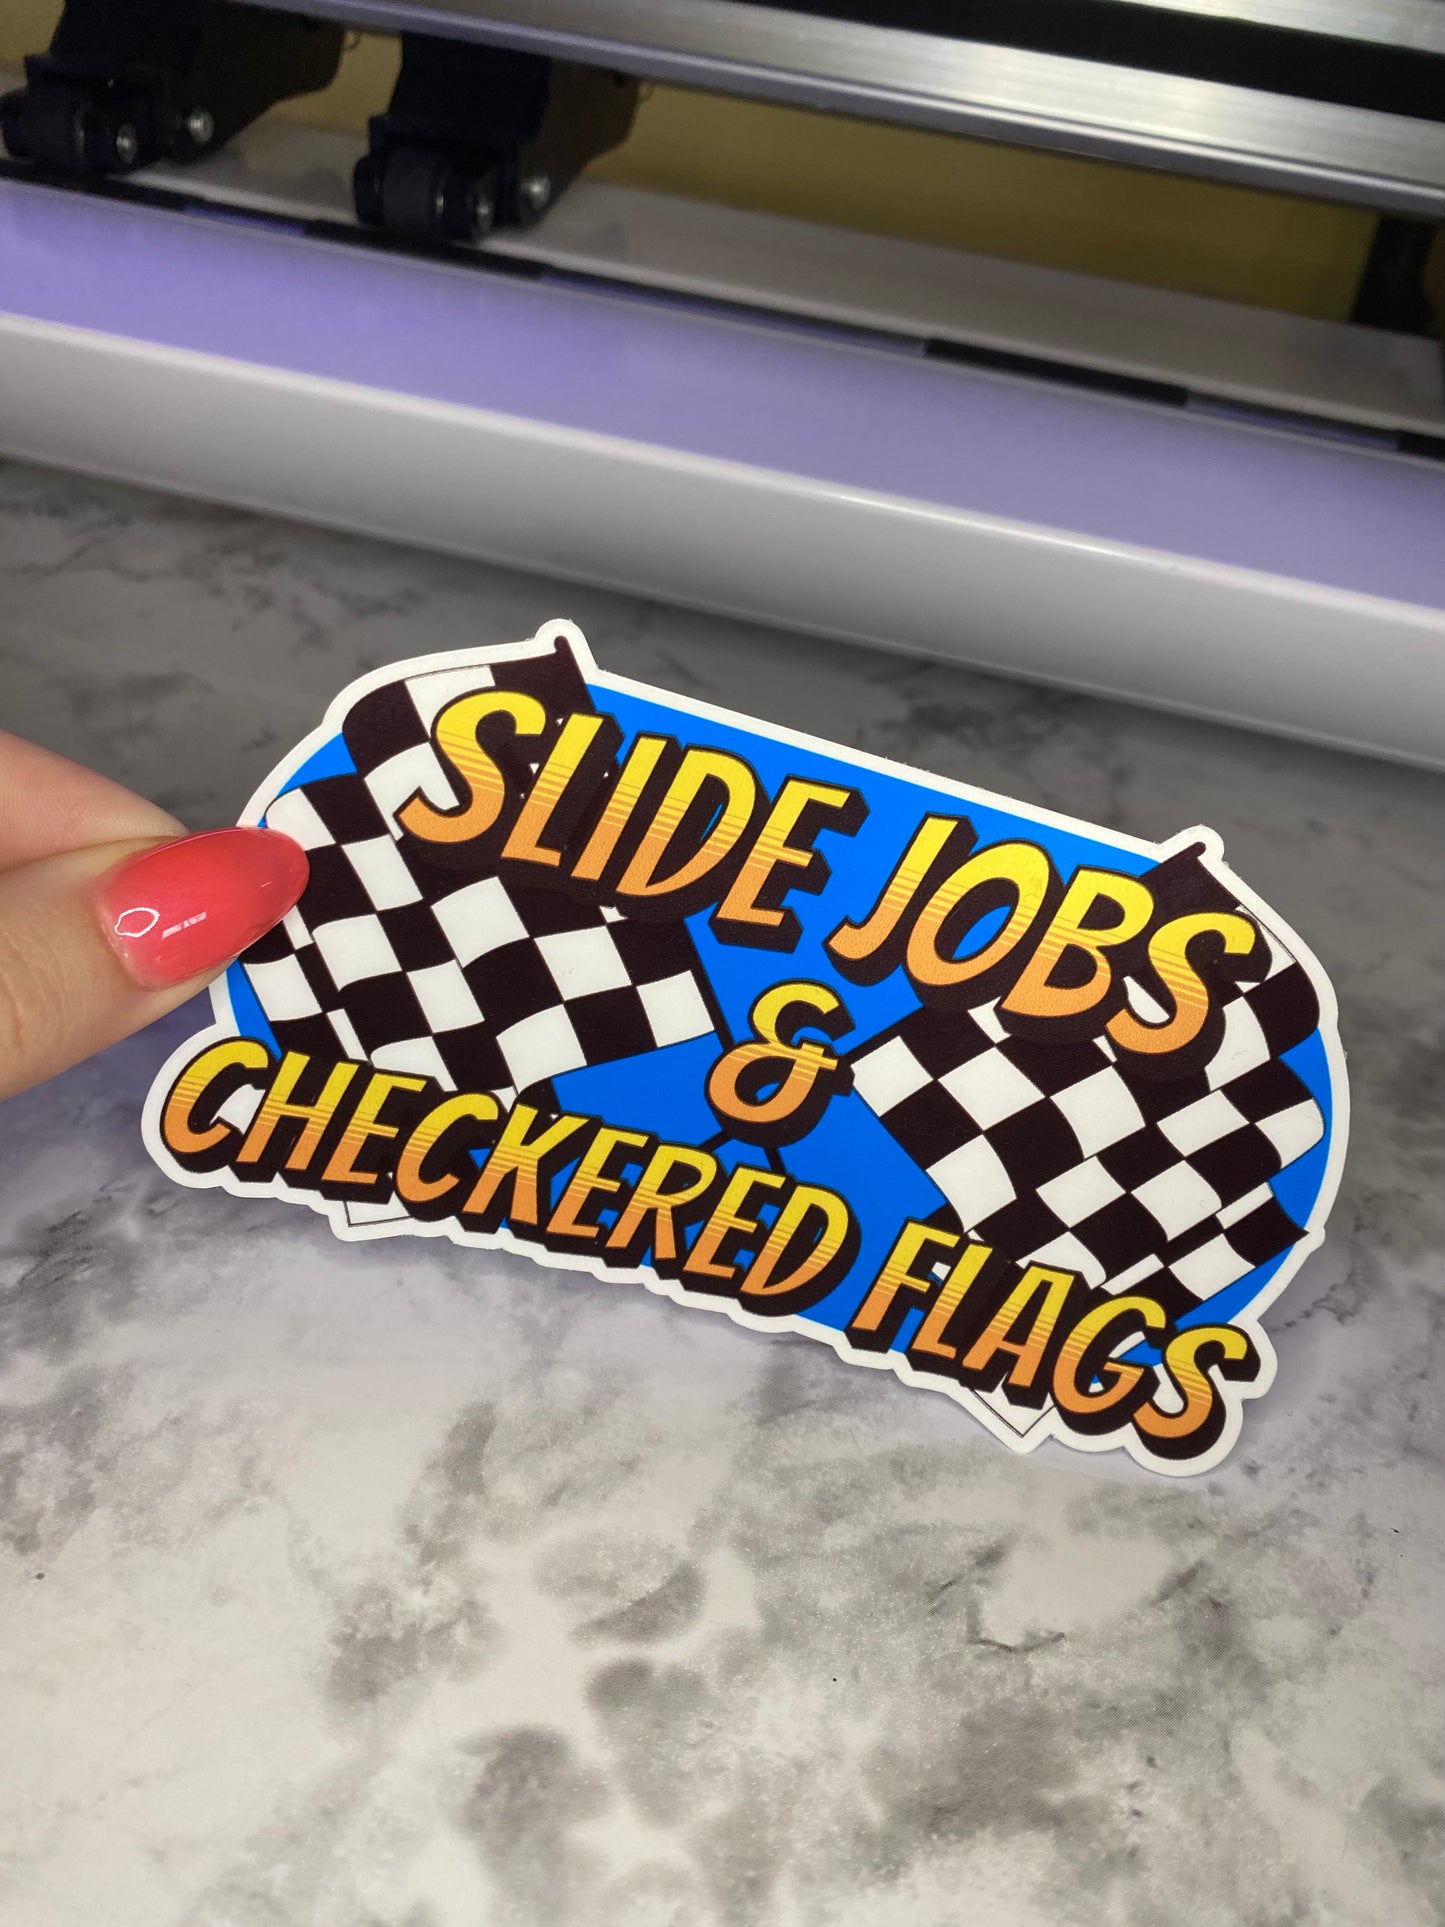 Slide Jobs And Checkered Flags Bumper Sticker Decal